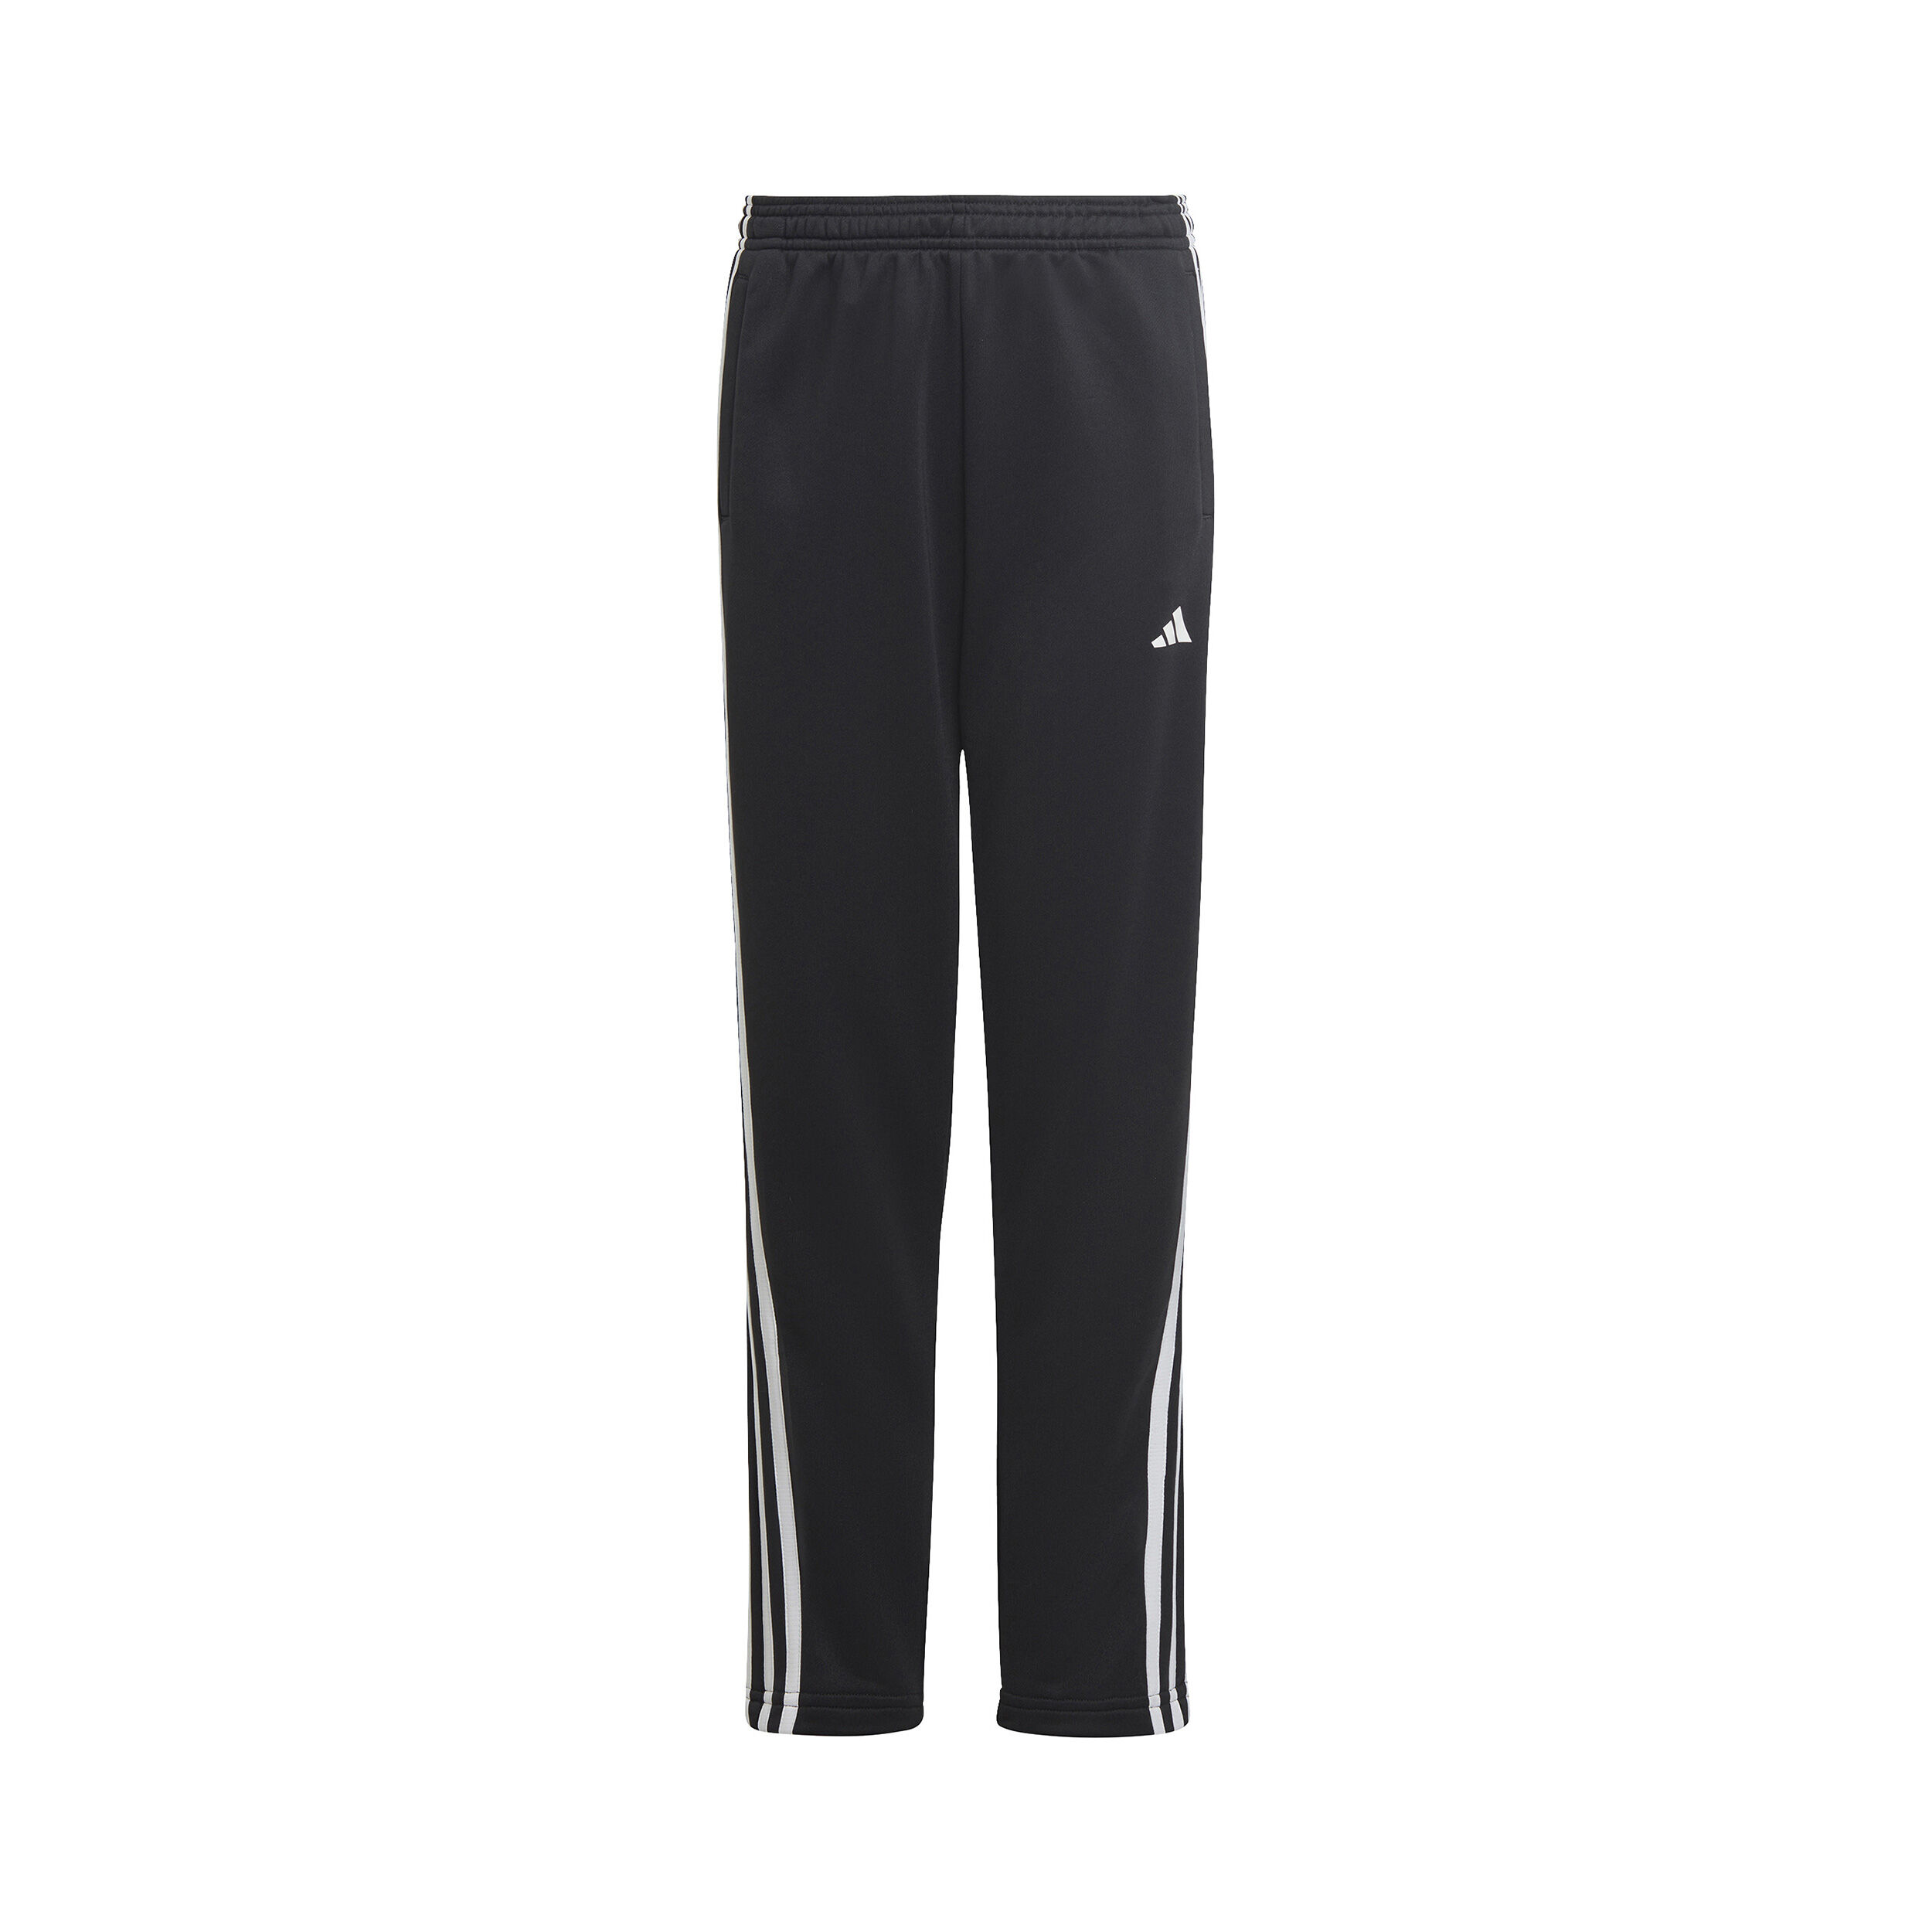 Adidas Mens Essentials Logo Track Pants Price Starting From Rs 2,631 | Find  Verified Sellers at Justdial